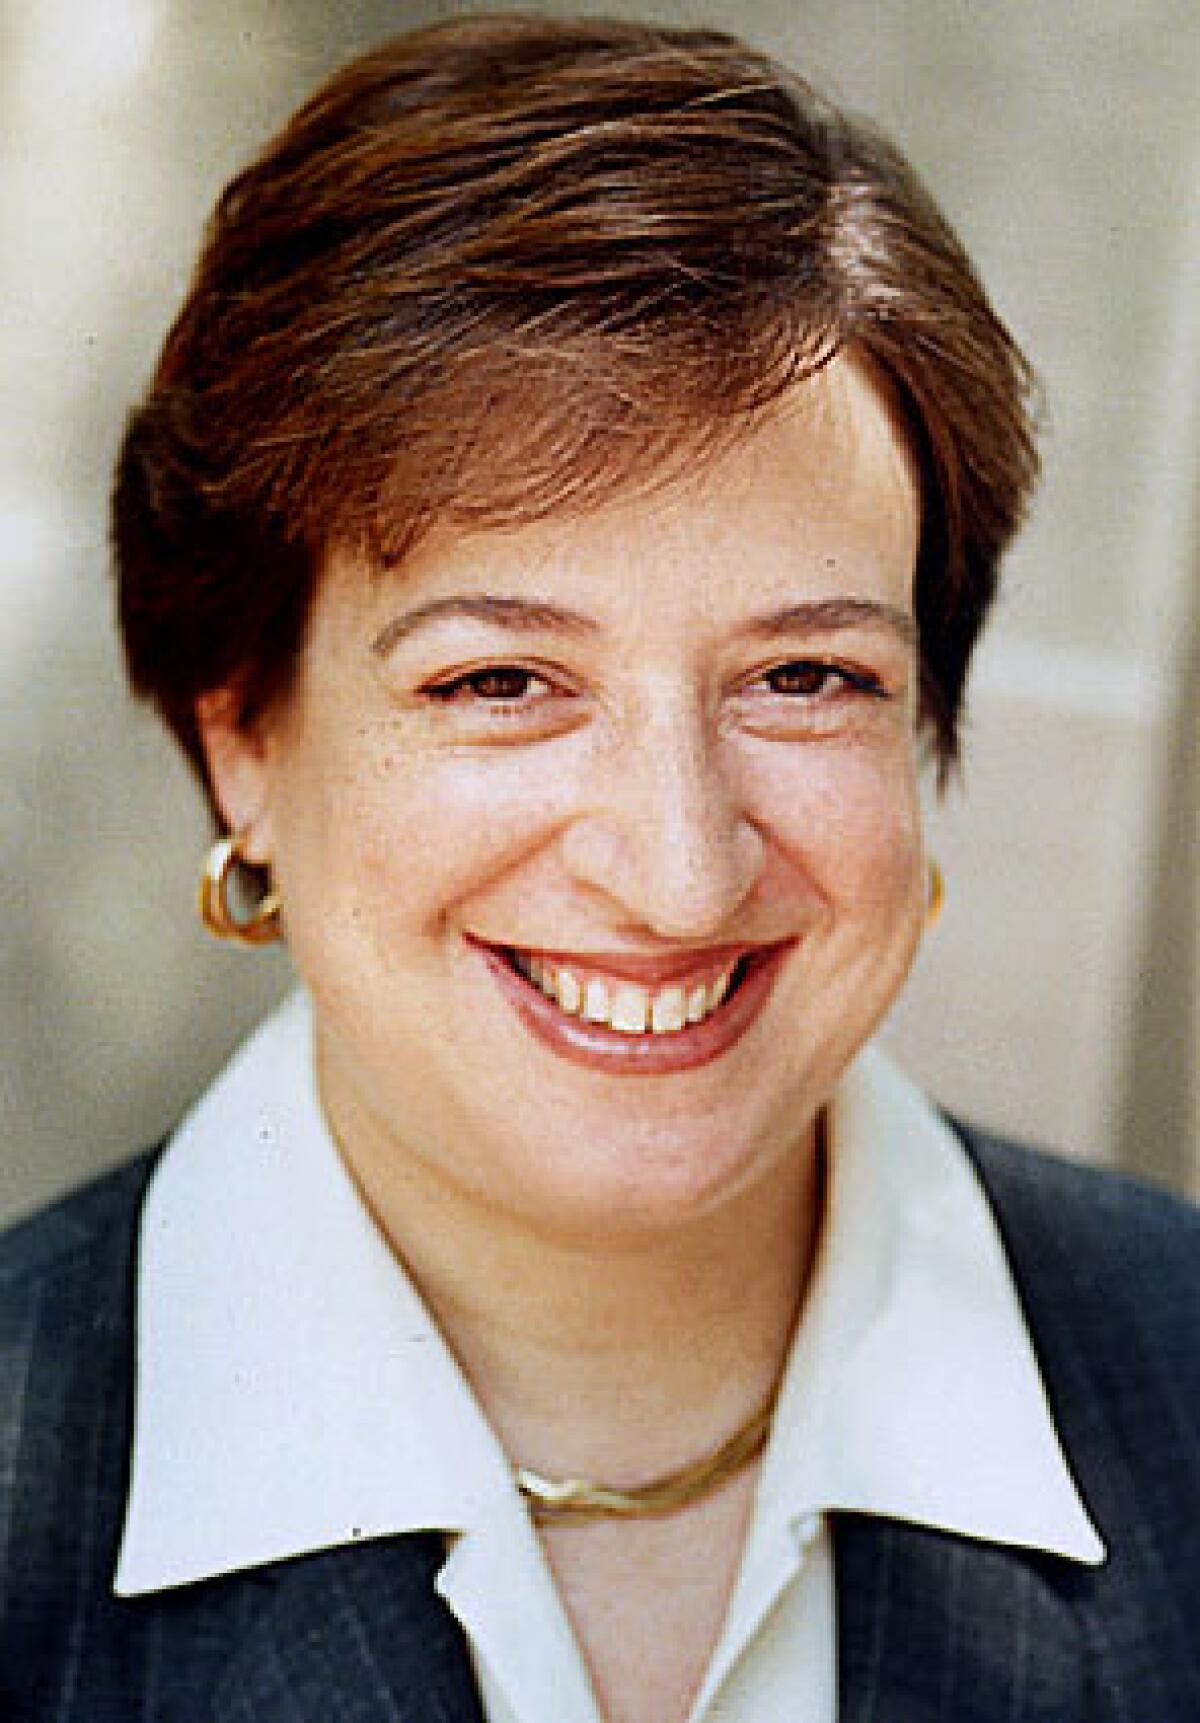 Justice Elena Kagan noted that states could oppose funding religious schools for reasons that have nothing to do with bigotry.